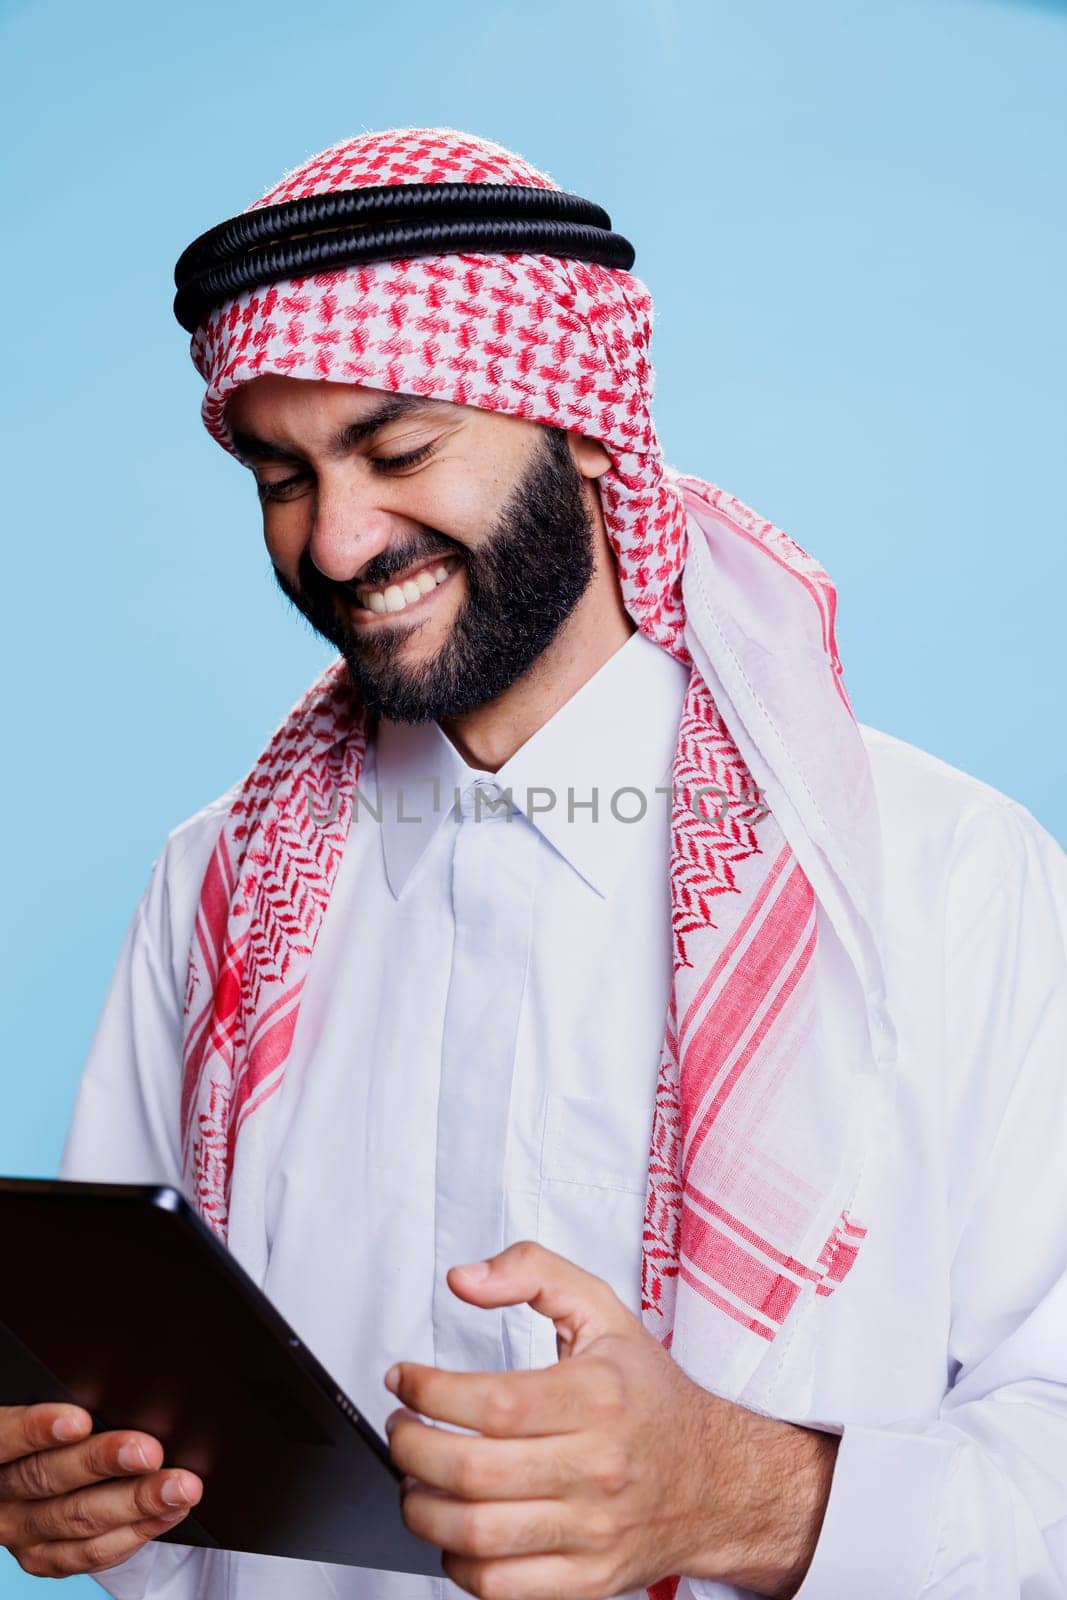 Arab man laughing while enjoying internet entertainment activity on digital tablet. Smiling muslim person having fun while chatting online and scrolling social media on gadget touchscreen